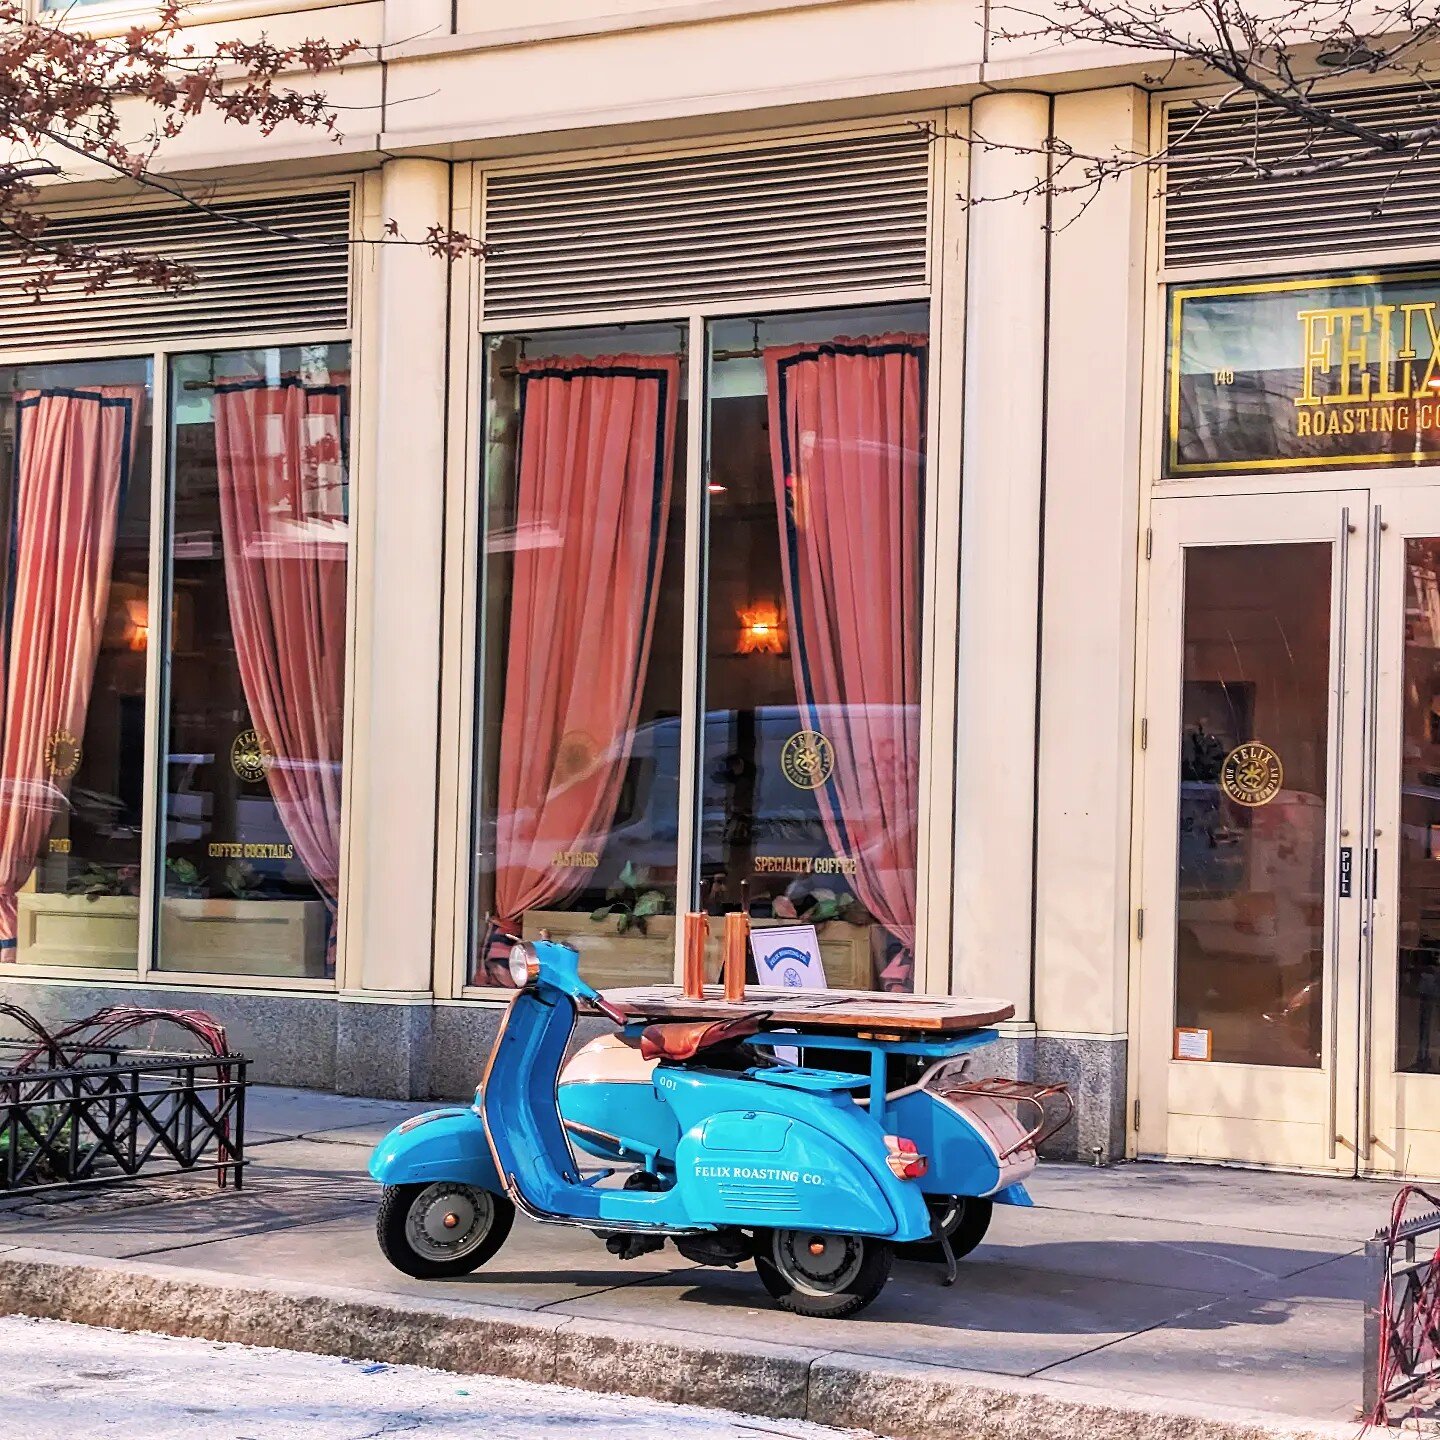 New business idea?? Saw this in NYC outside @felixroastingco. An Italian scooter with coffee taps. How about with prosecco taps?! I'm thinking pink and calling it Prosecco on the Go. 😁🍾🛵

#nyc
#onlyinnyc
#italianscooters
#prosecco
#felixroastingco